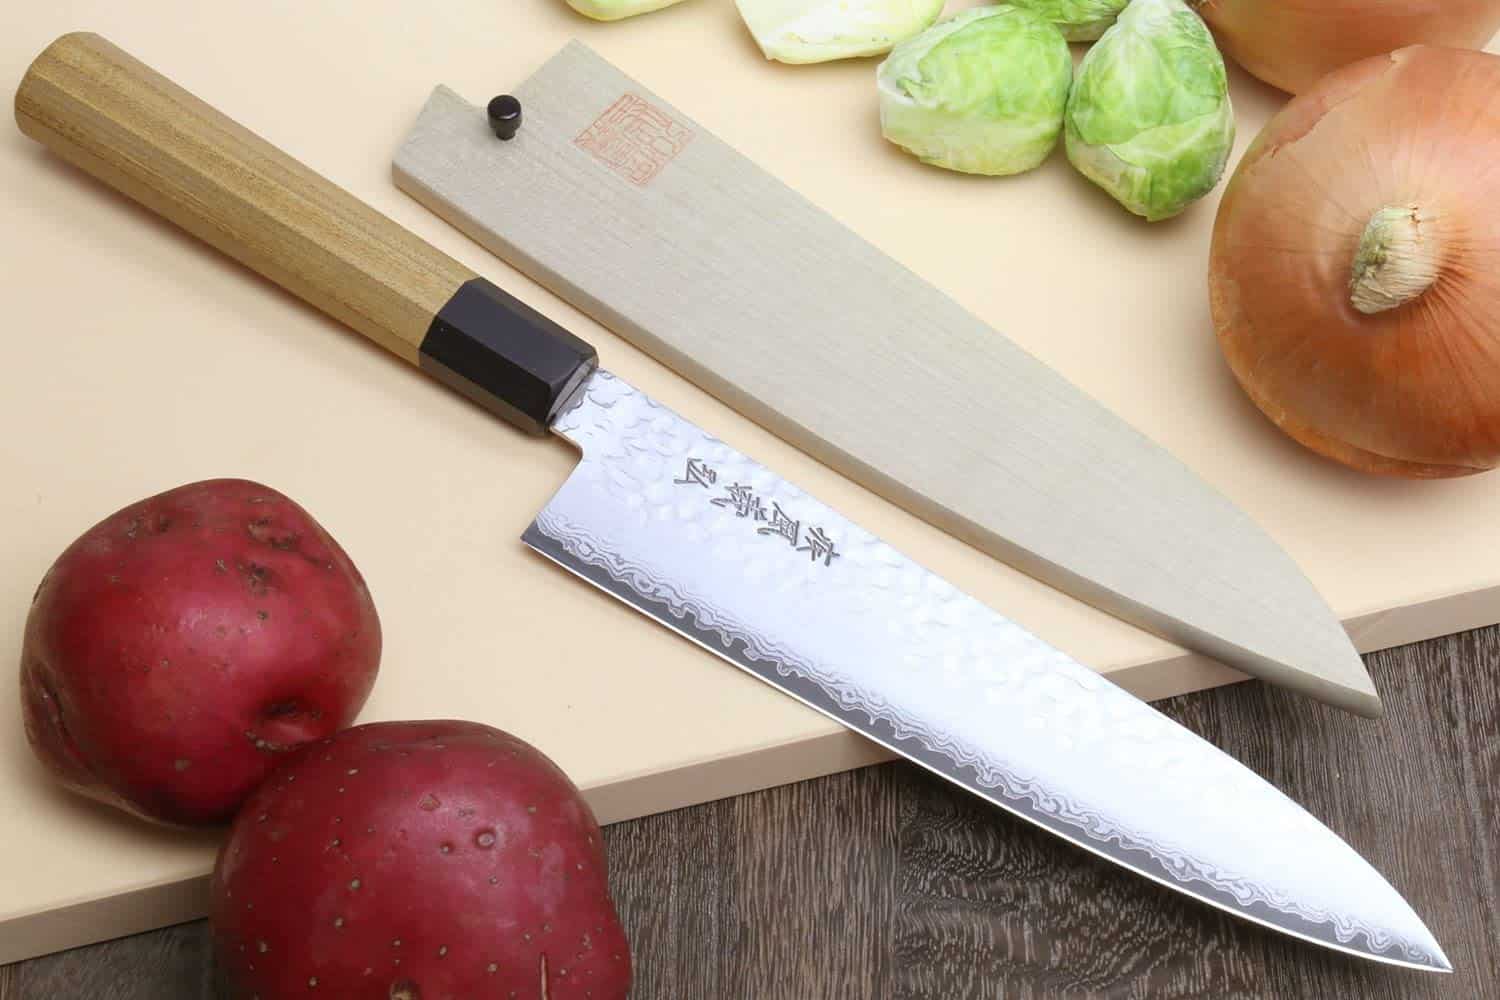 Best gyuto knife with sheath & best for chefs- Yoshihiro VG-10 46 Layers Hammered Damascus on table